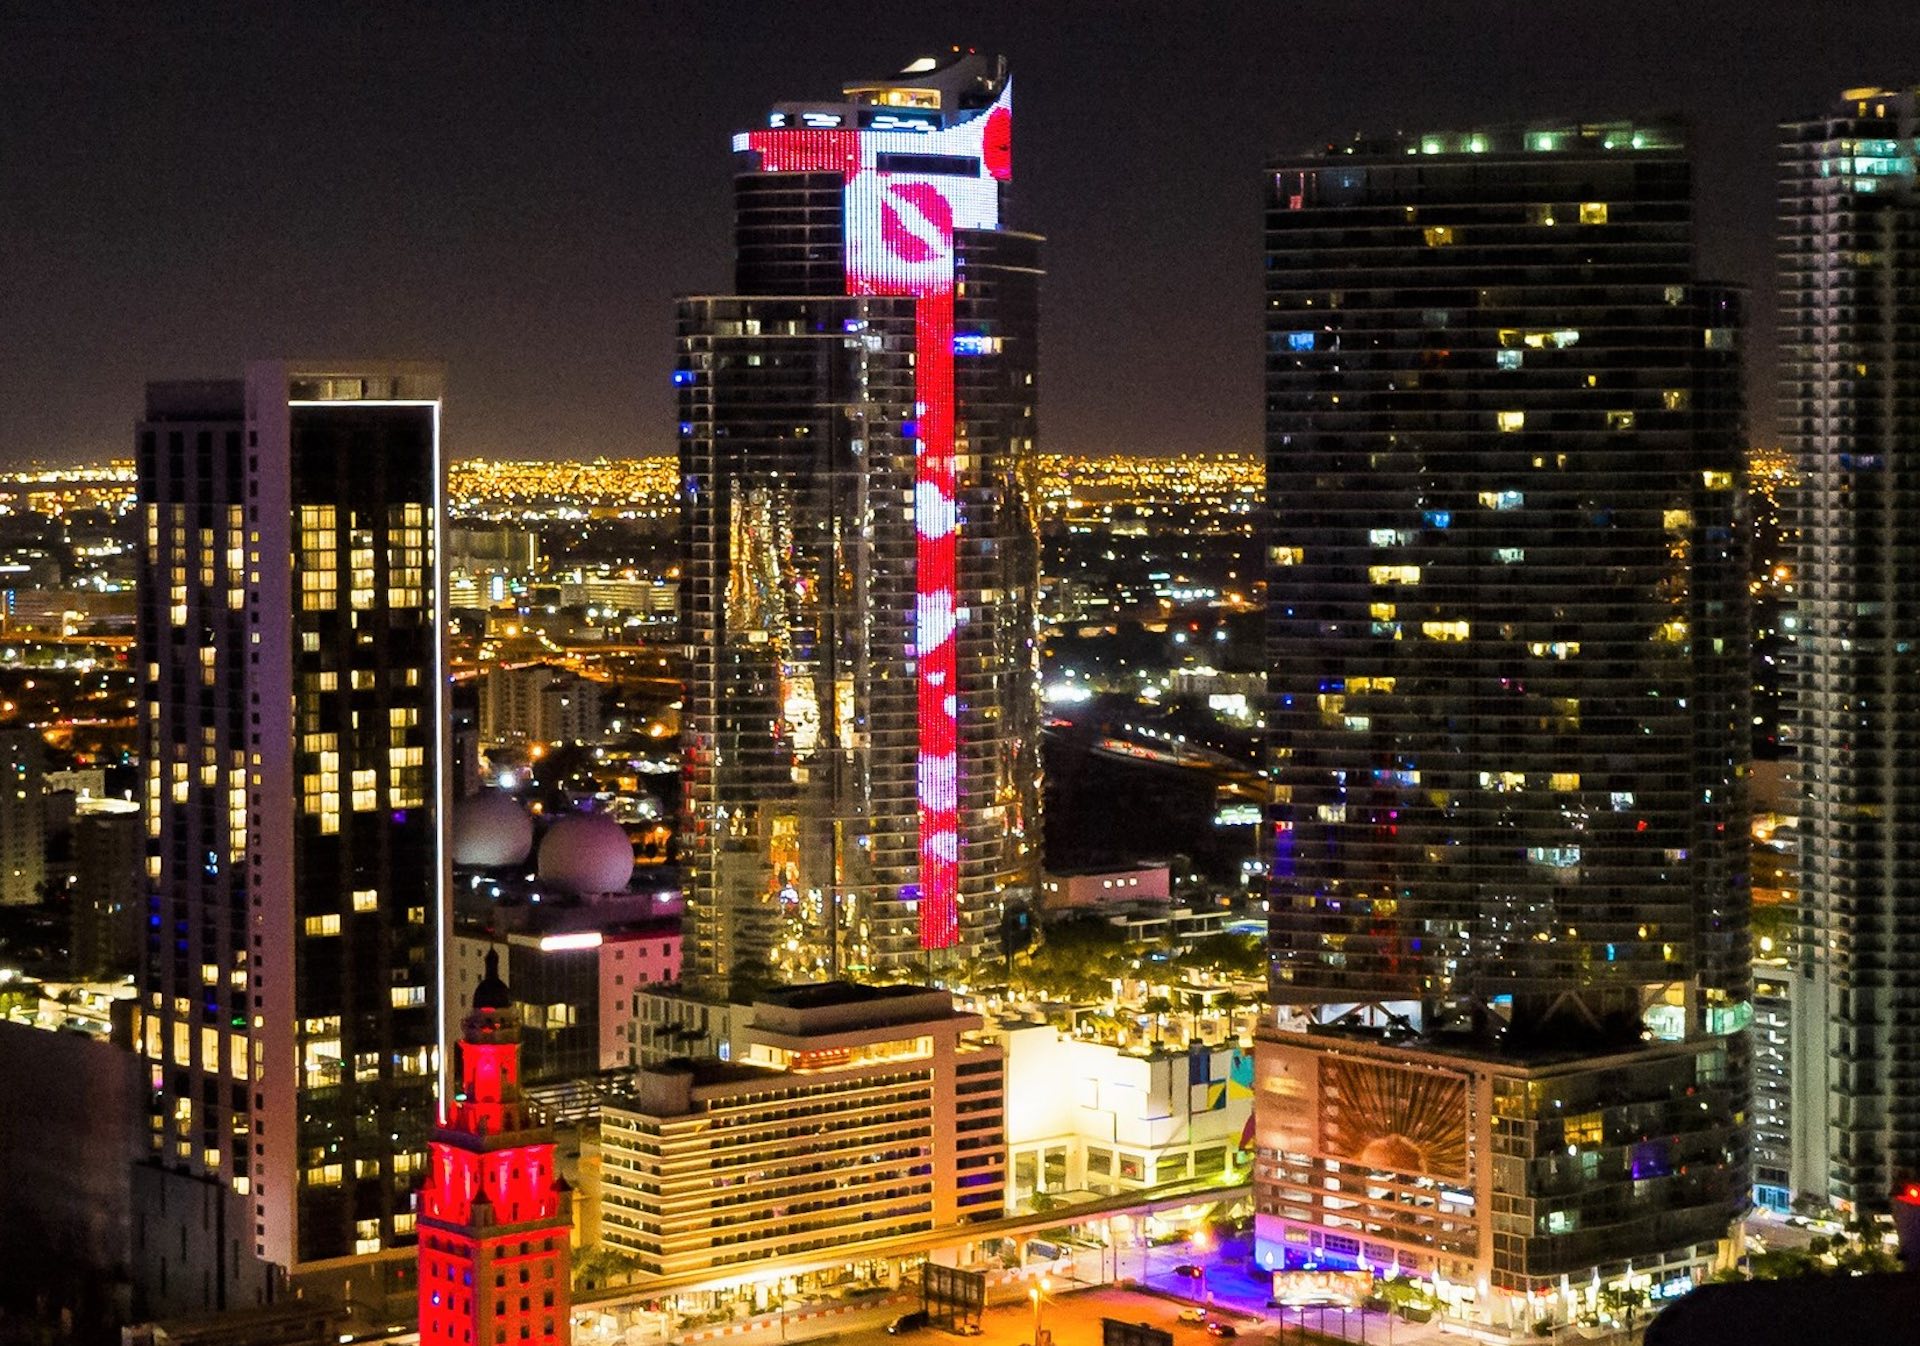 Miami Worldcenter lights up with the world's tallest Valentine's Day greeting